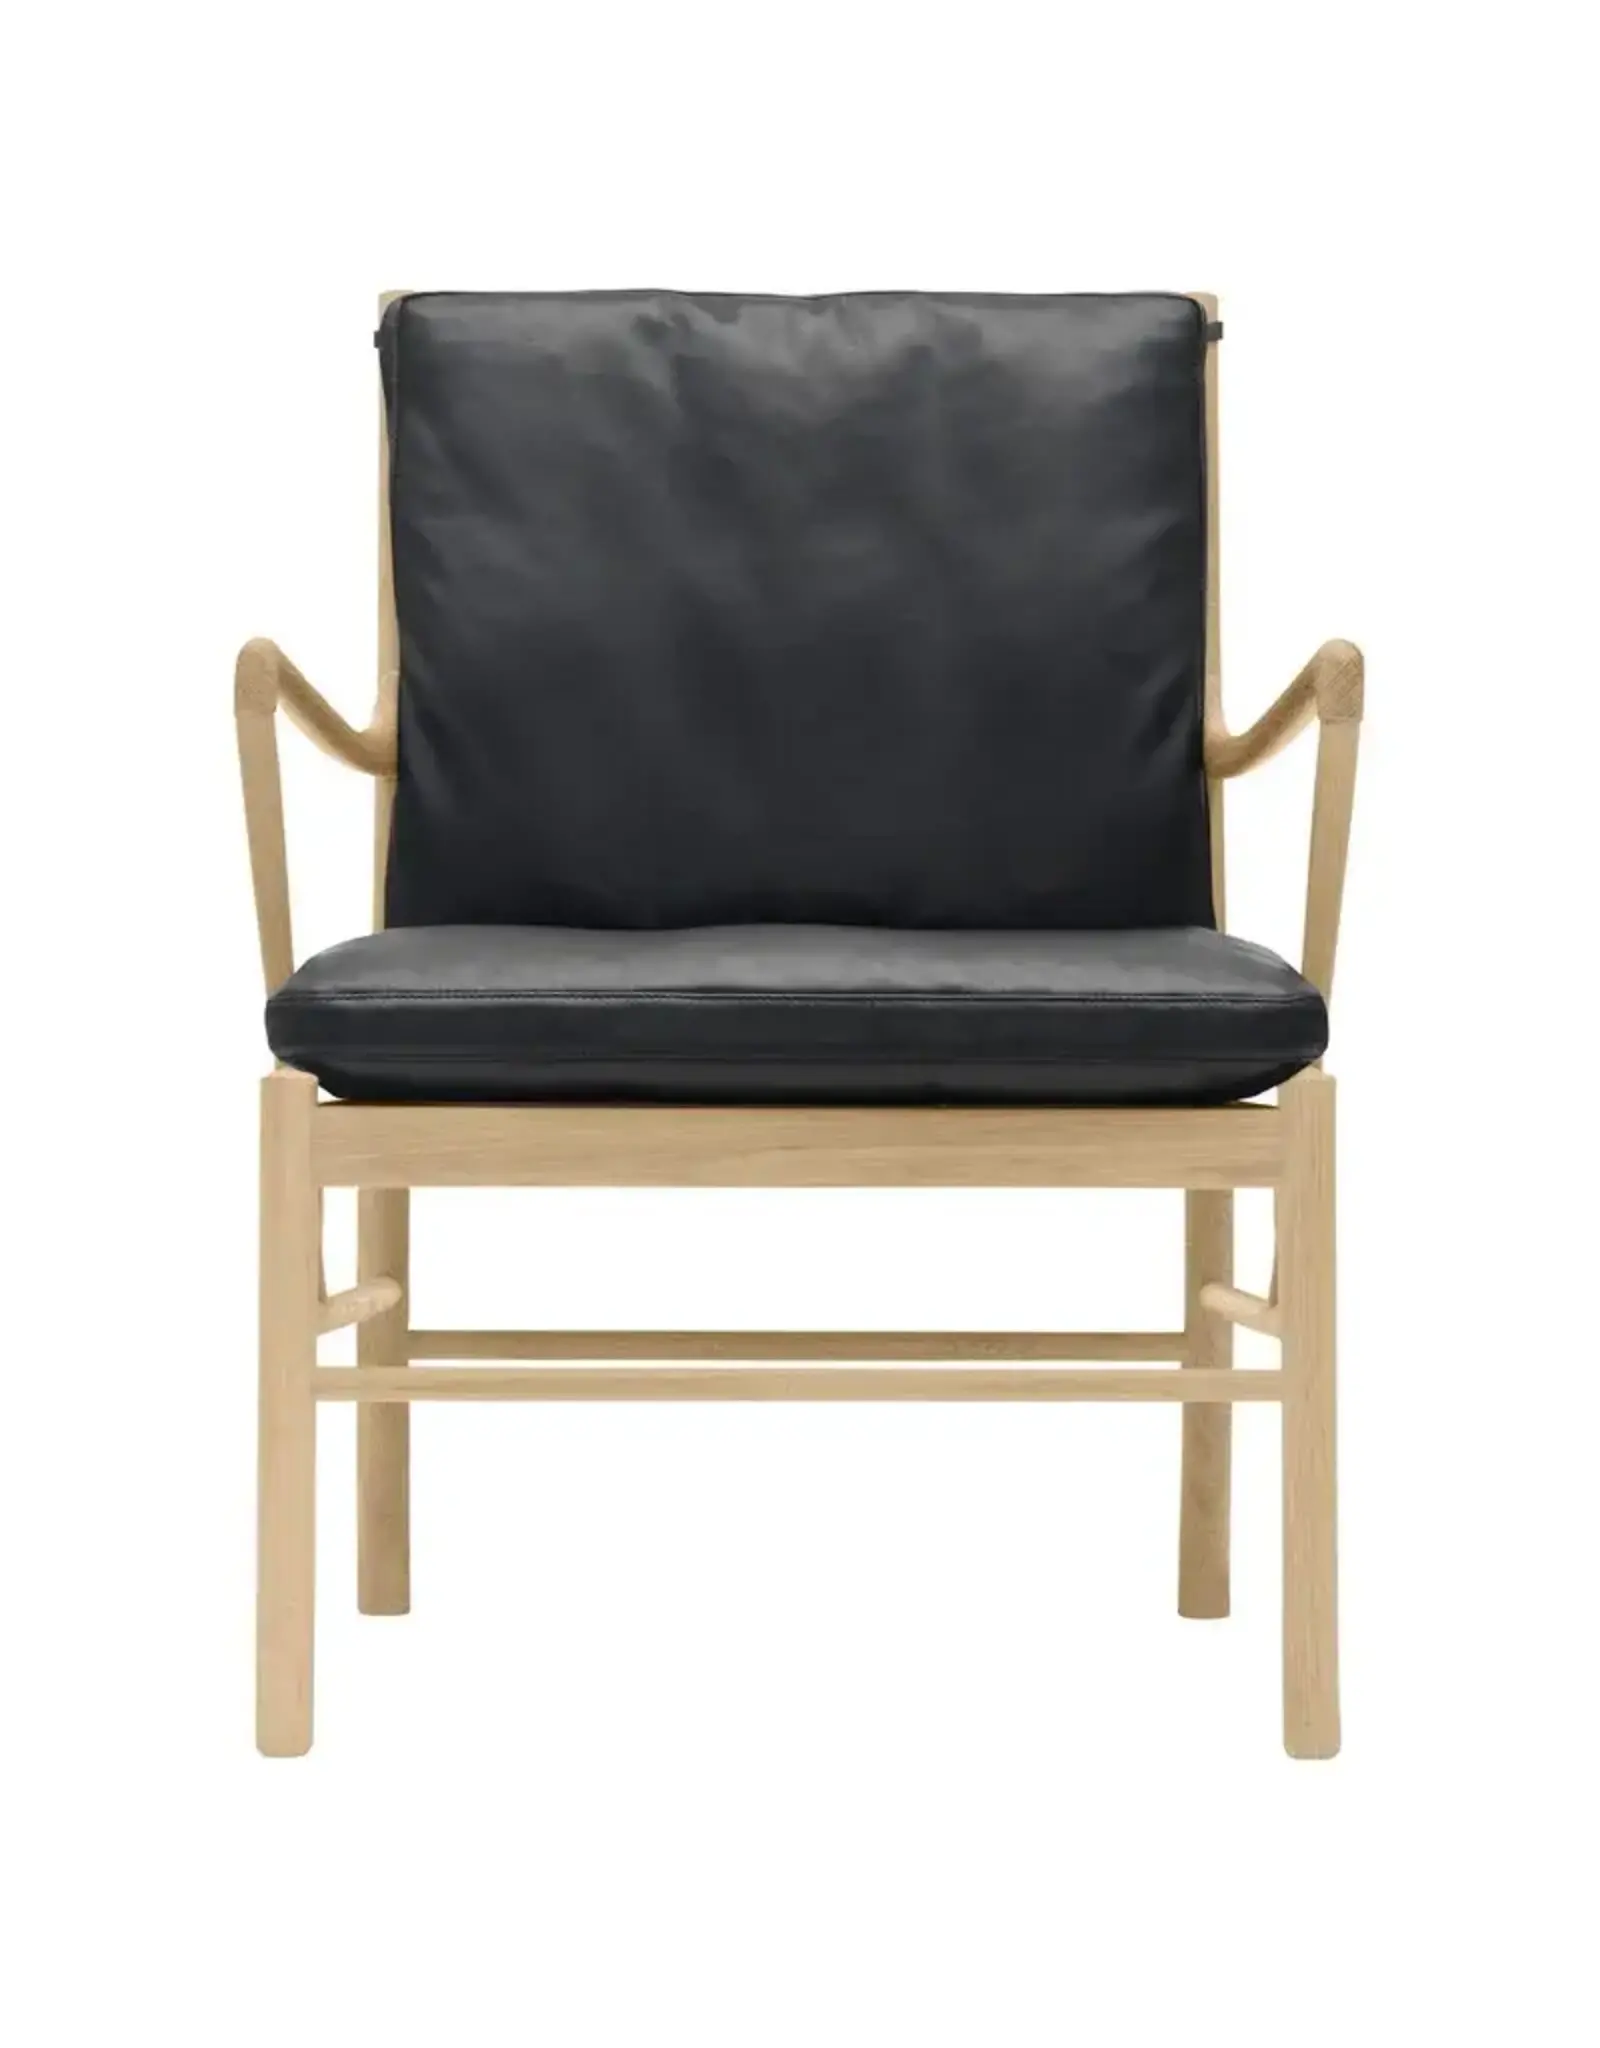 OW149 COLONIAL CHAIR IN BLACK LOKE LEATHER